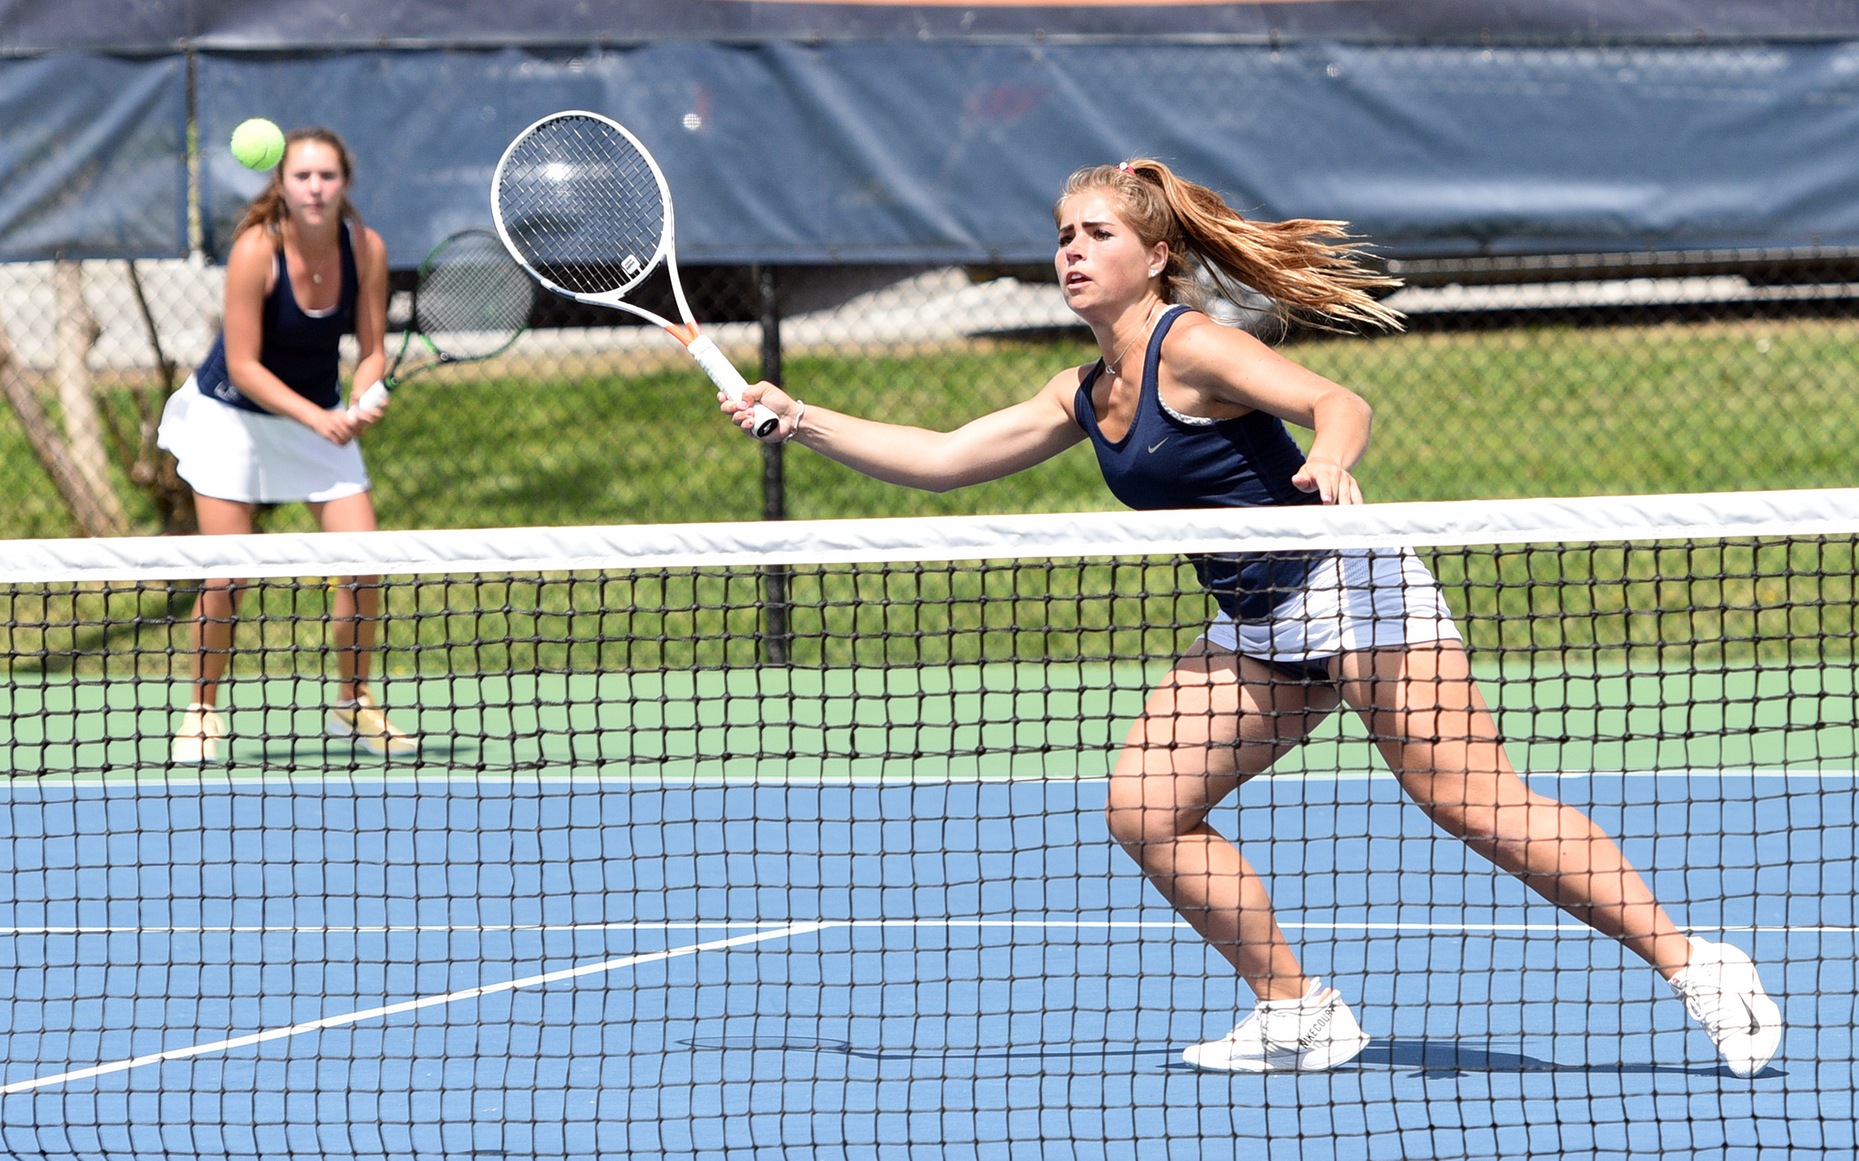 Eagles look to sharpen skills at University of the Cumberlands Tournament